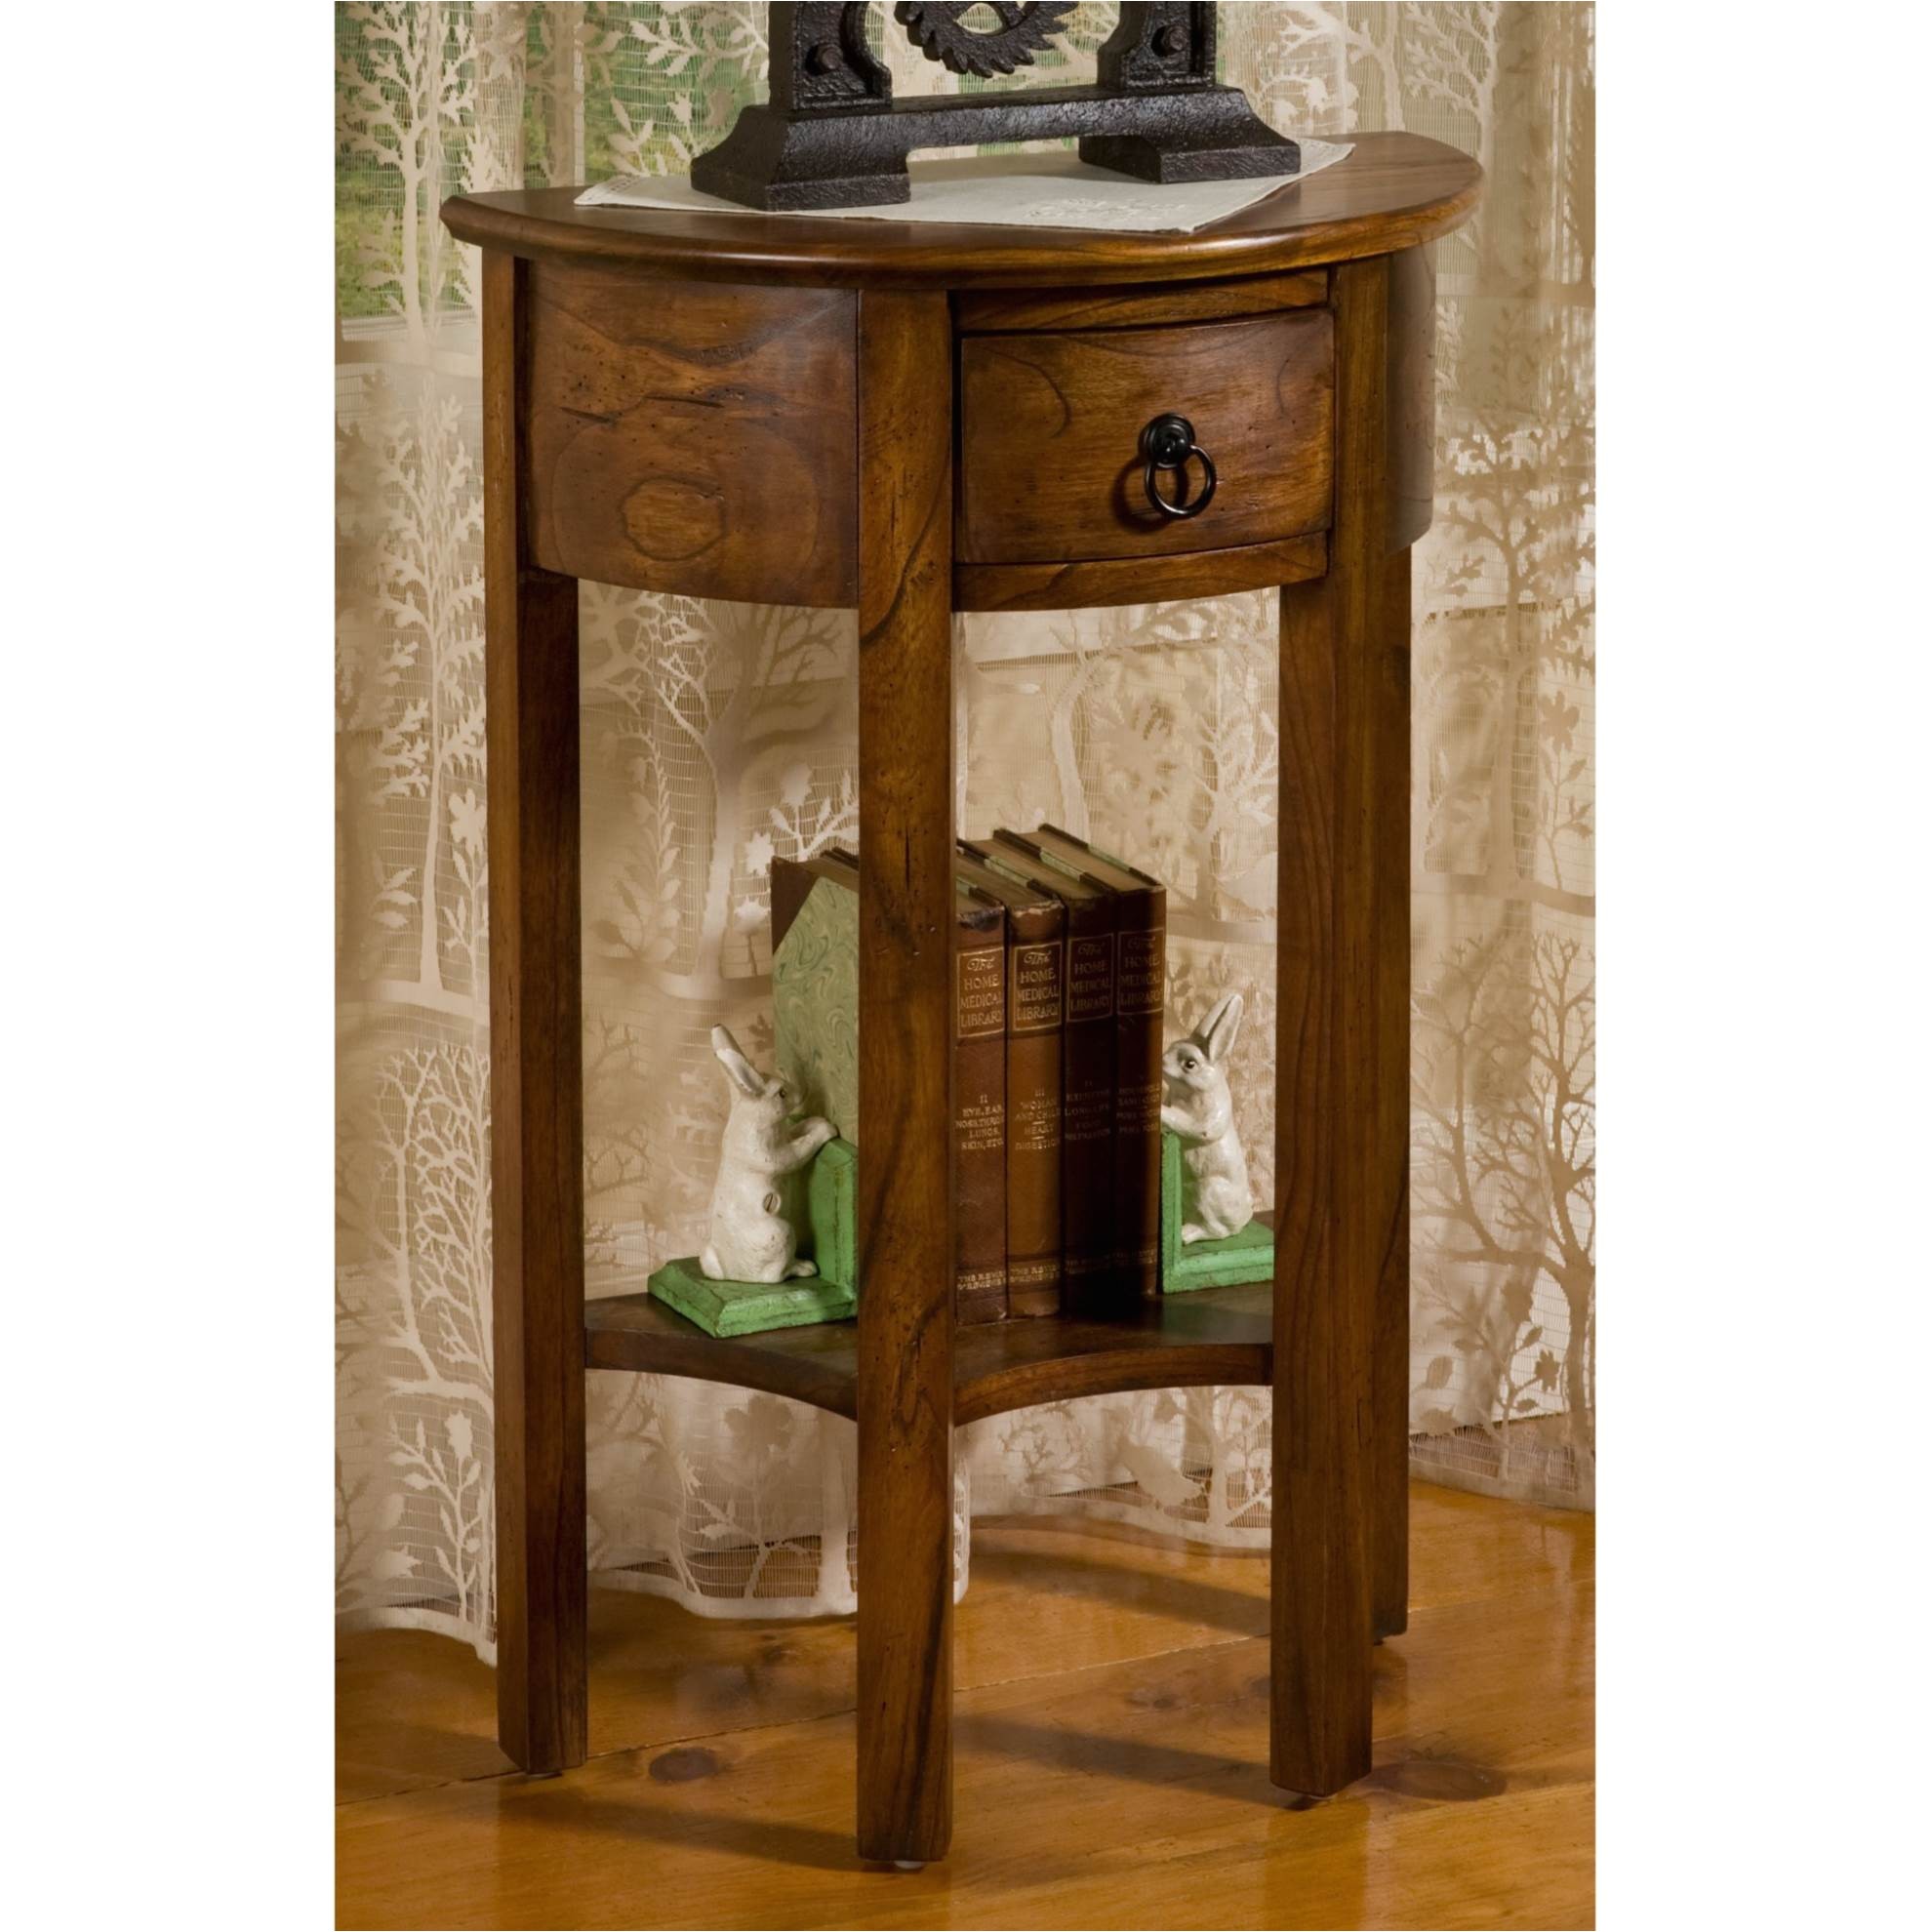 Hobby Lobby Accent Tables Nontraditional Uses for Accent Tables In the Home